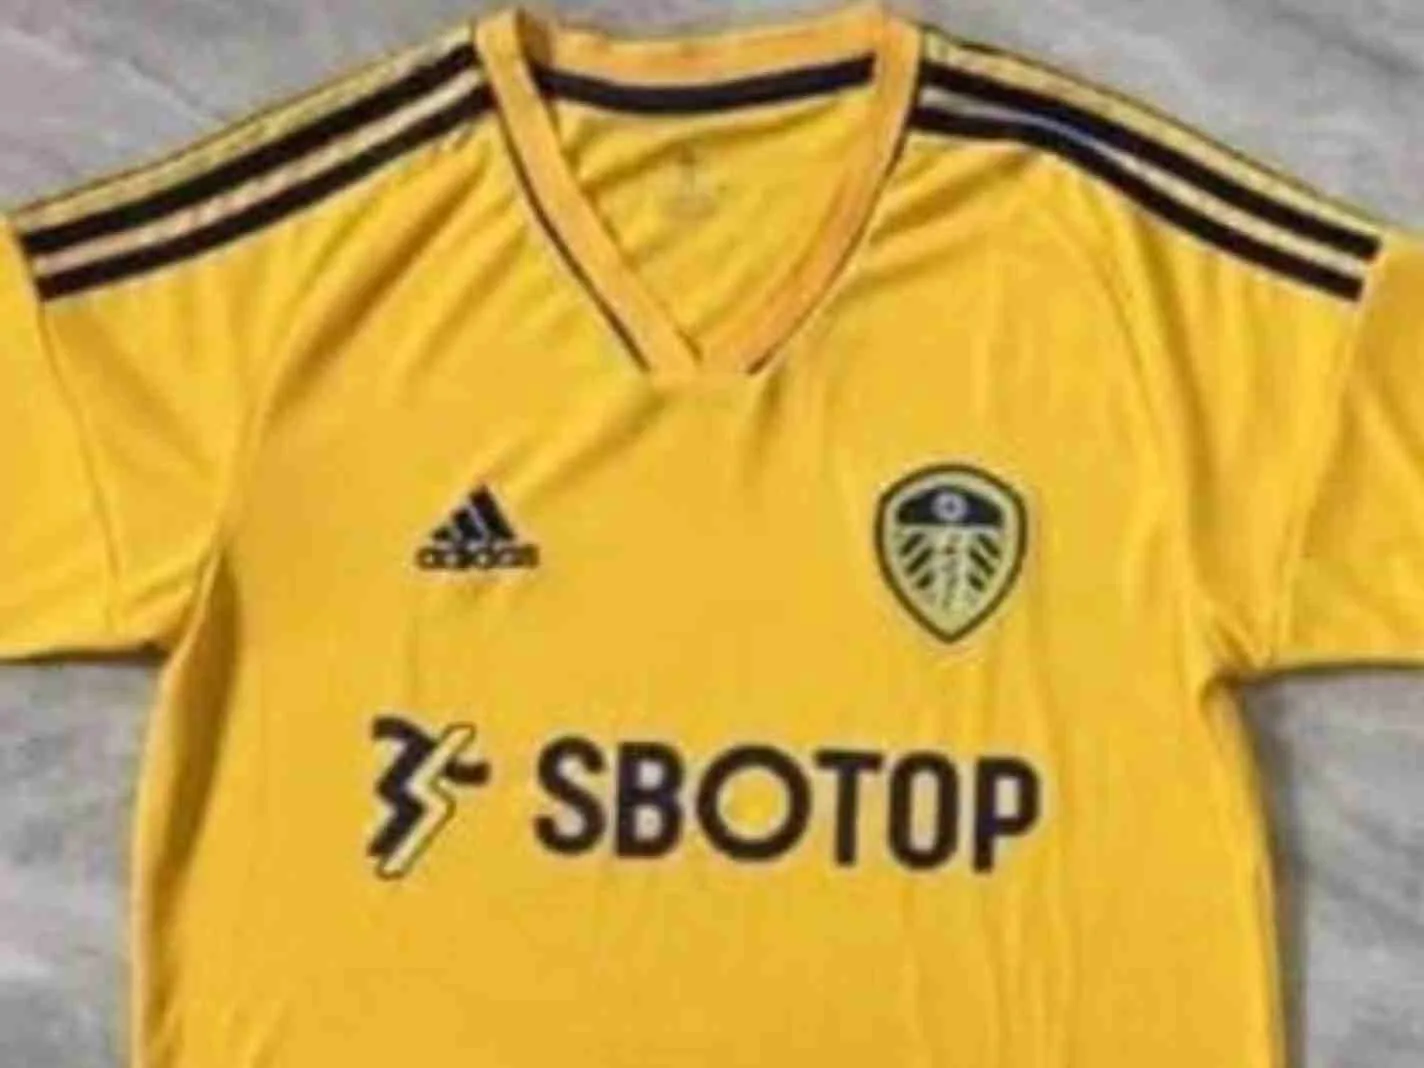 The possible yellow away kit Leeds United are set to wear next season